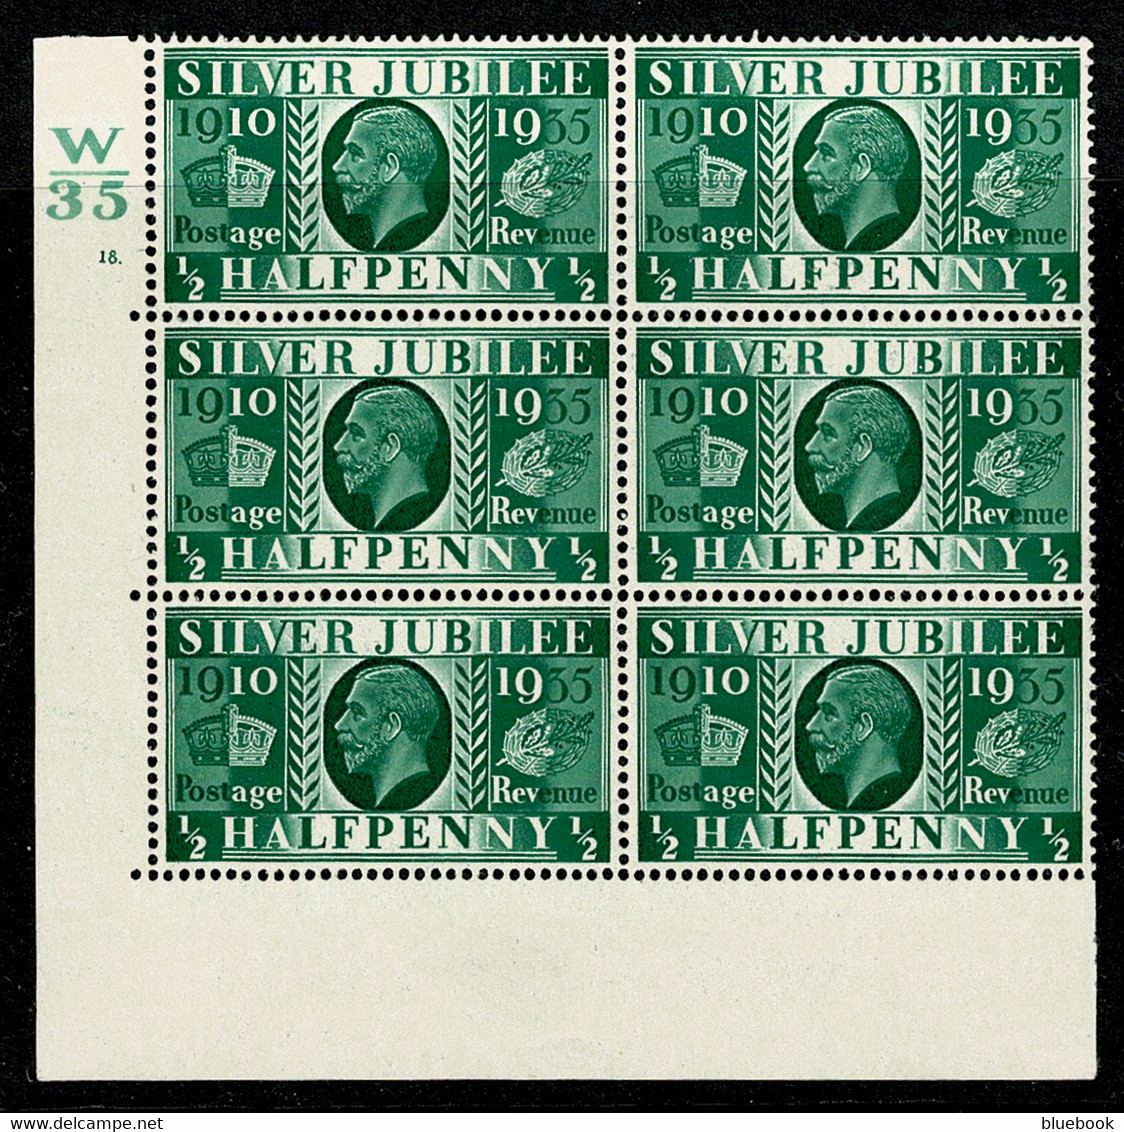 Ref 1587 - GB 1935 Silver Jubilee 1/2d Control Block (W35) Cylinder 18. Of 6 Stamps MNH/MM - Ungebraucht